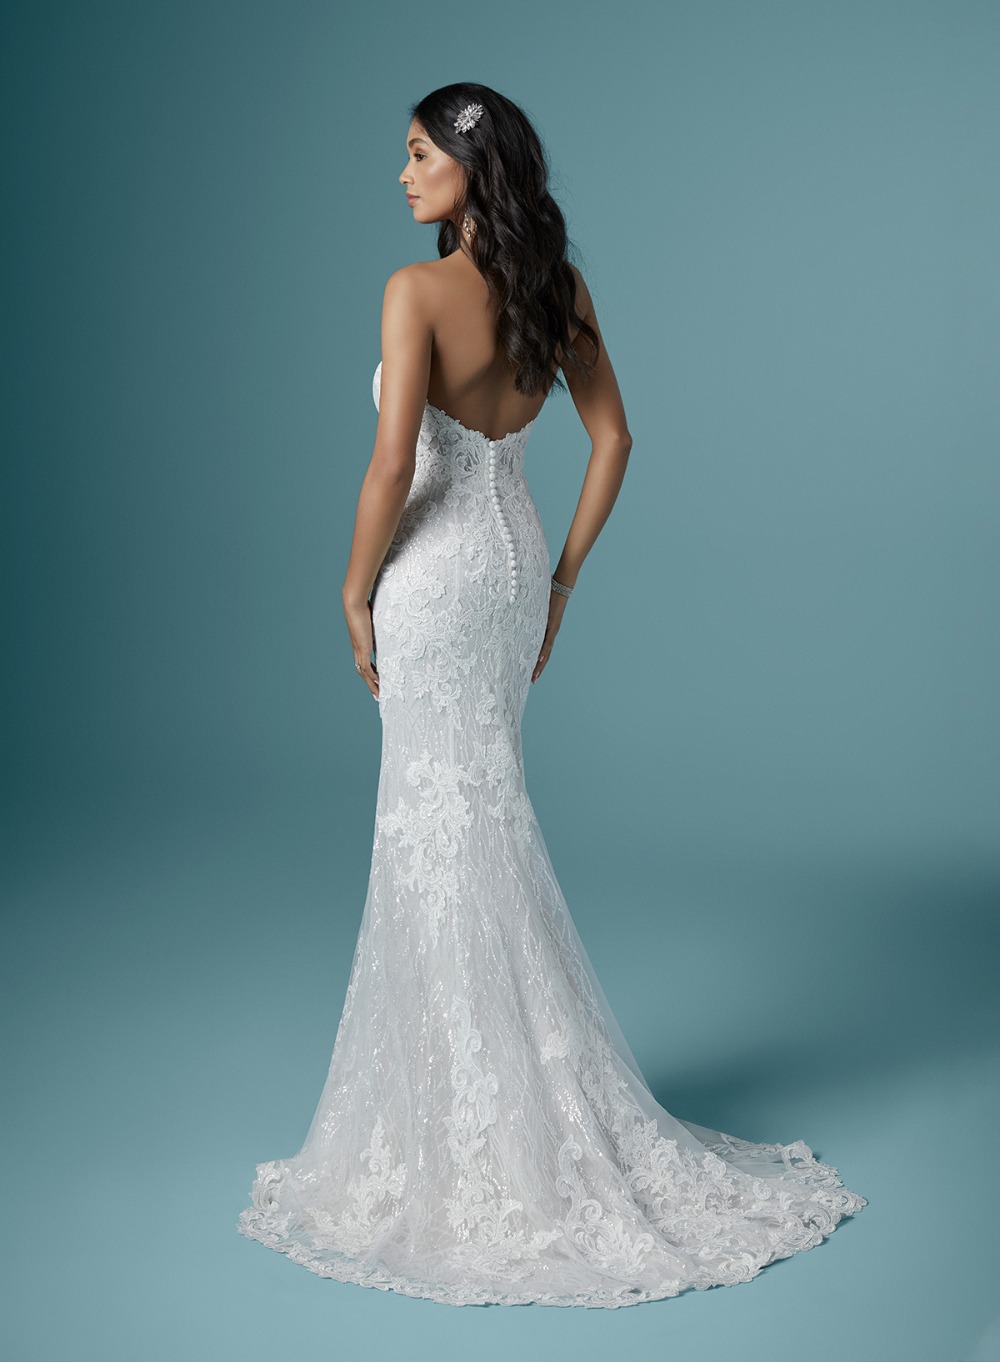 Maggie-Sottero-Kaysen-20MS323-Back2-Uncropped